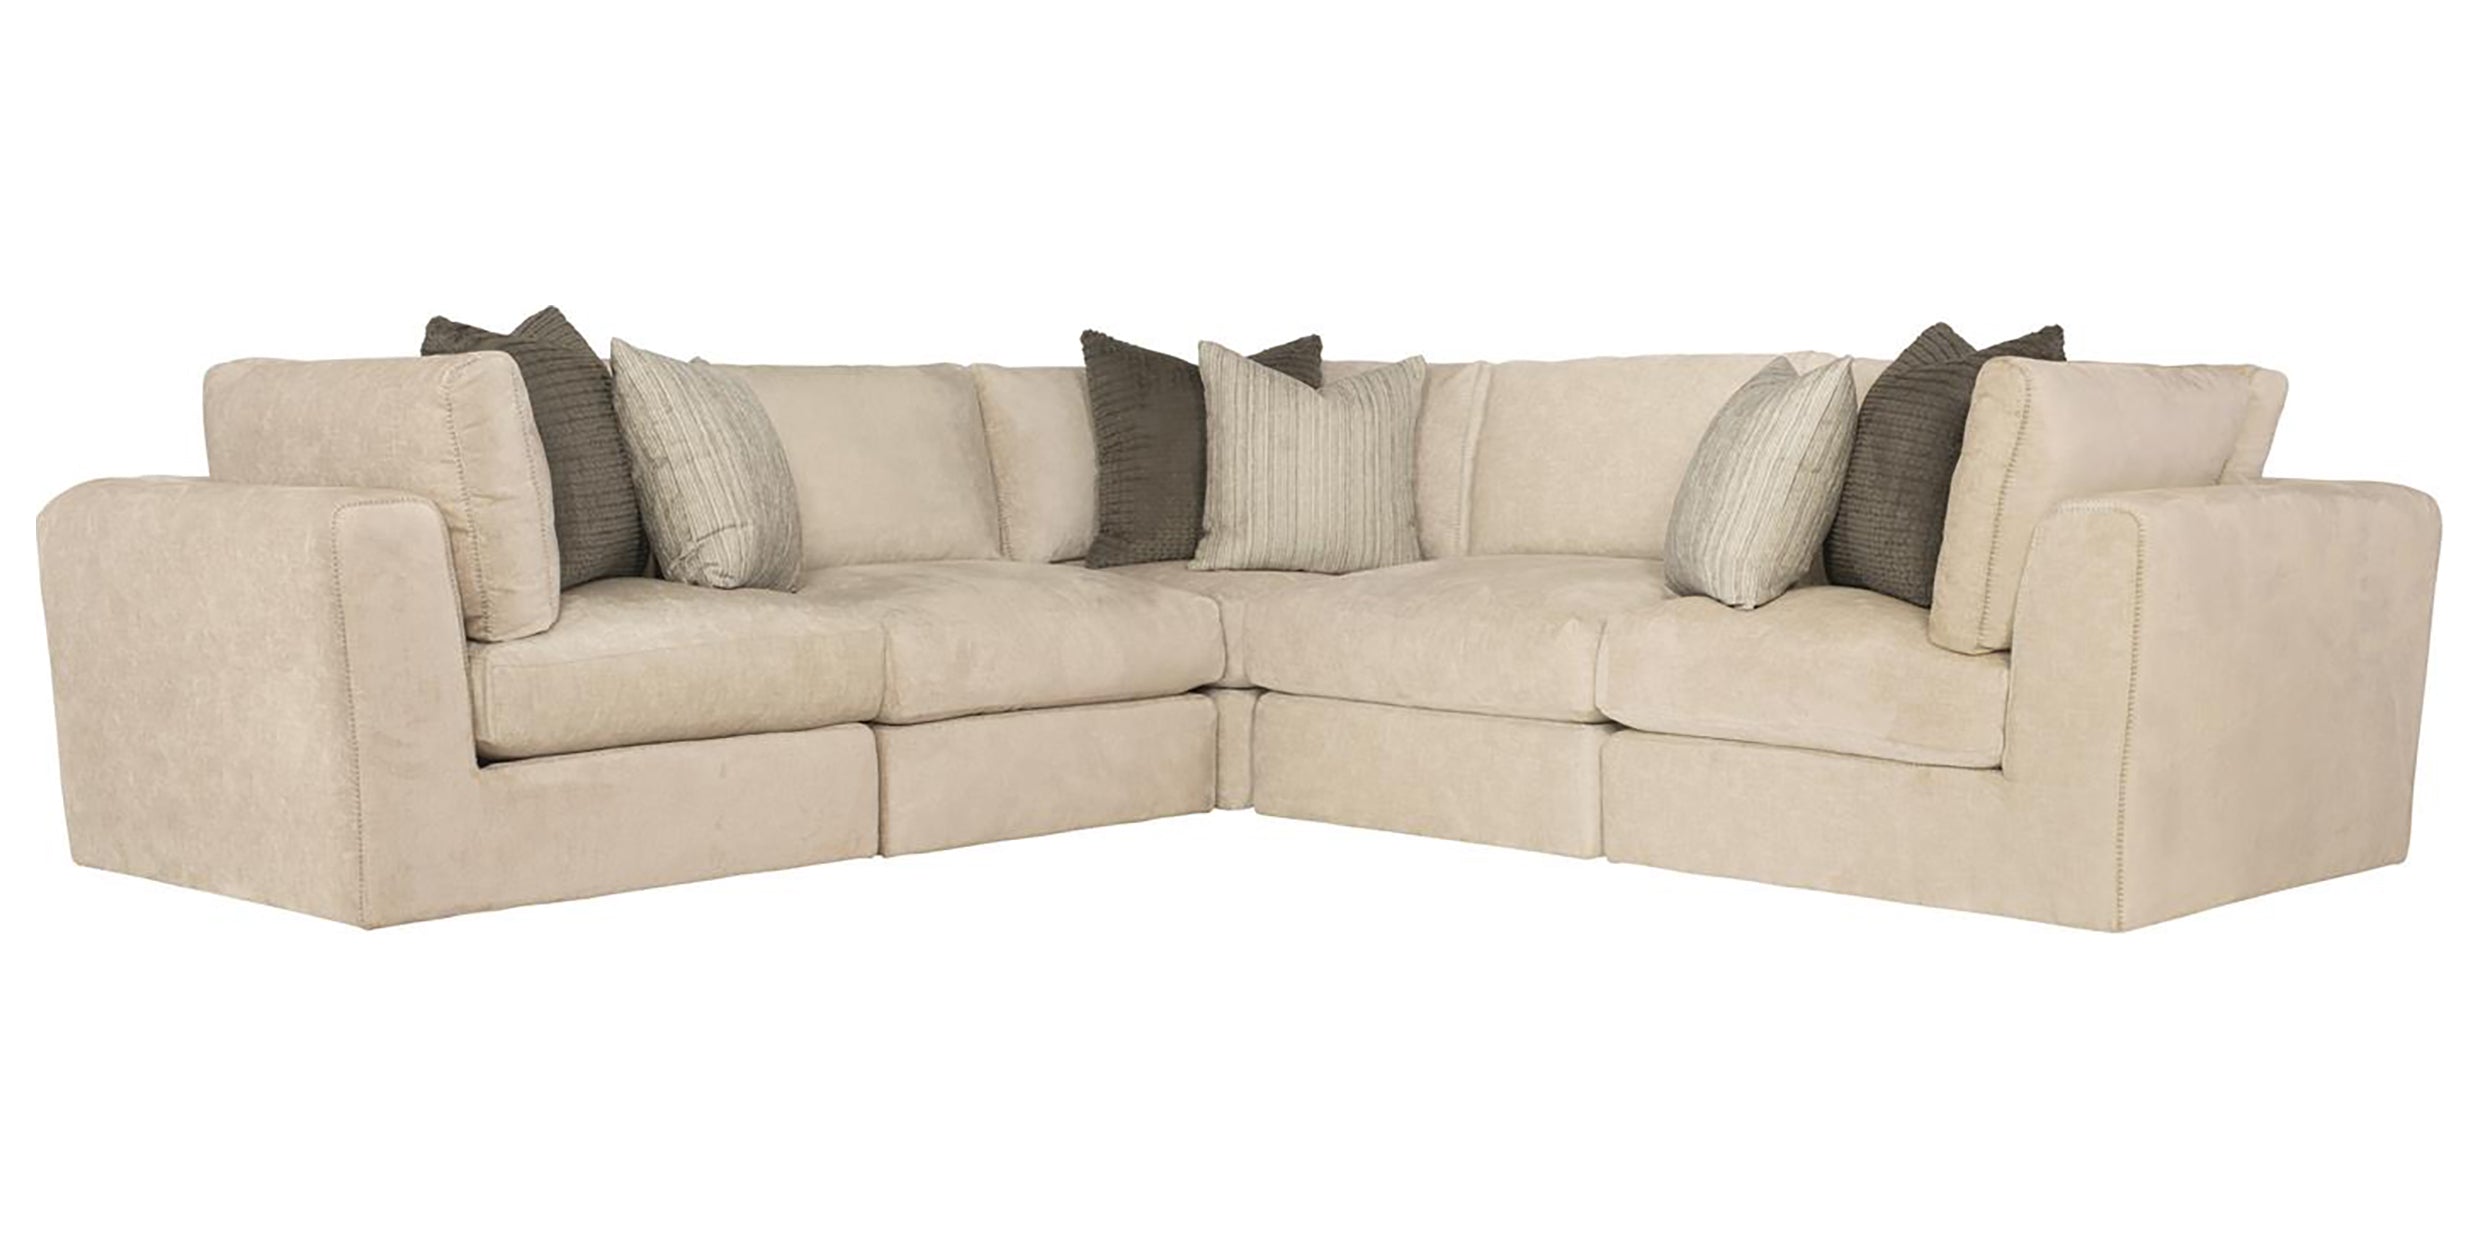 1021-002 Fabric with T0850 Decorative Thread | Bernhardt Oasis Fabric Sectional | Valley Ridge Furniture